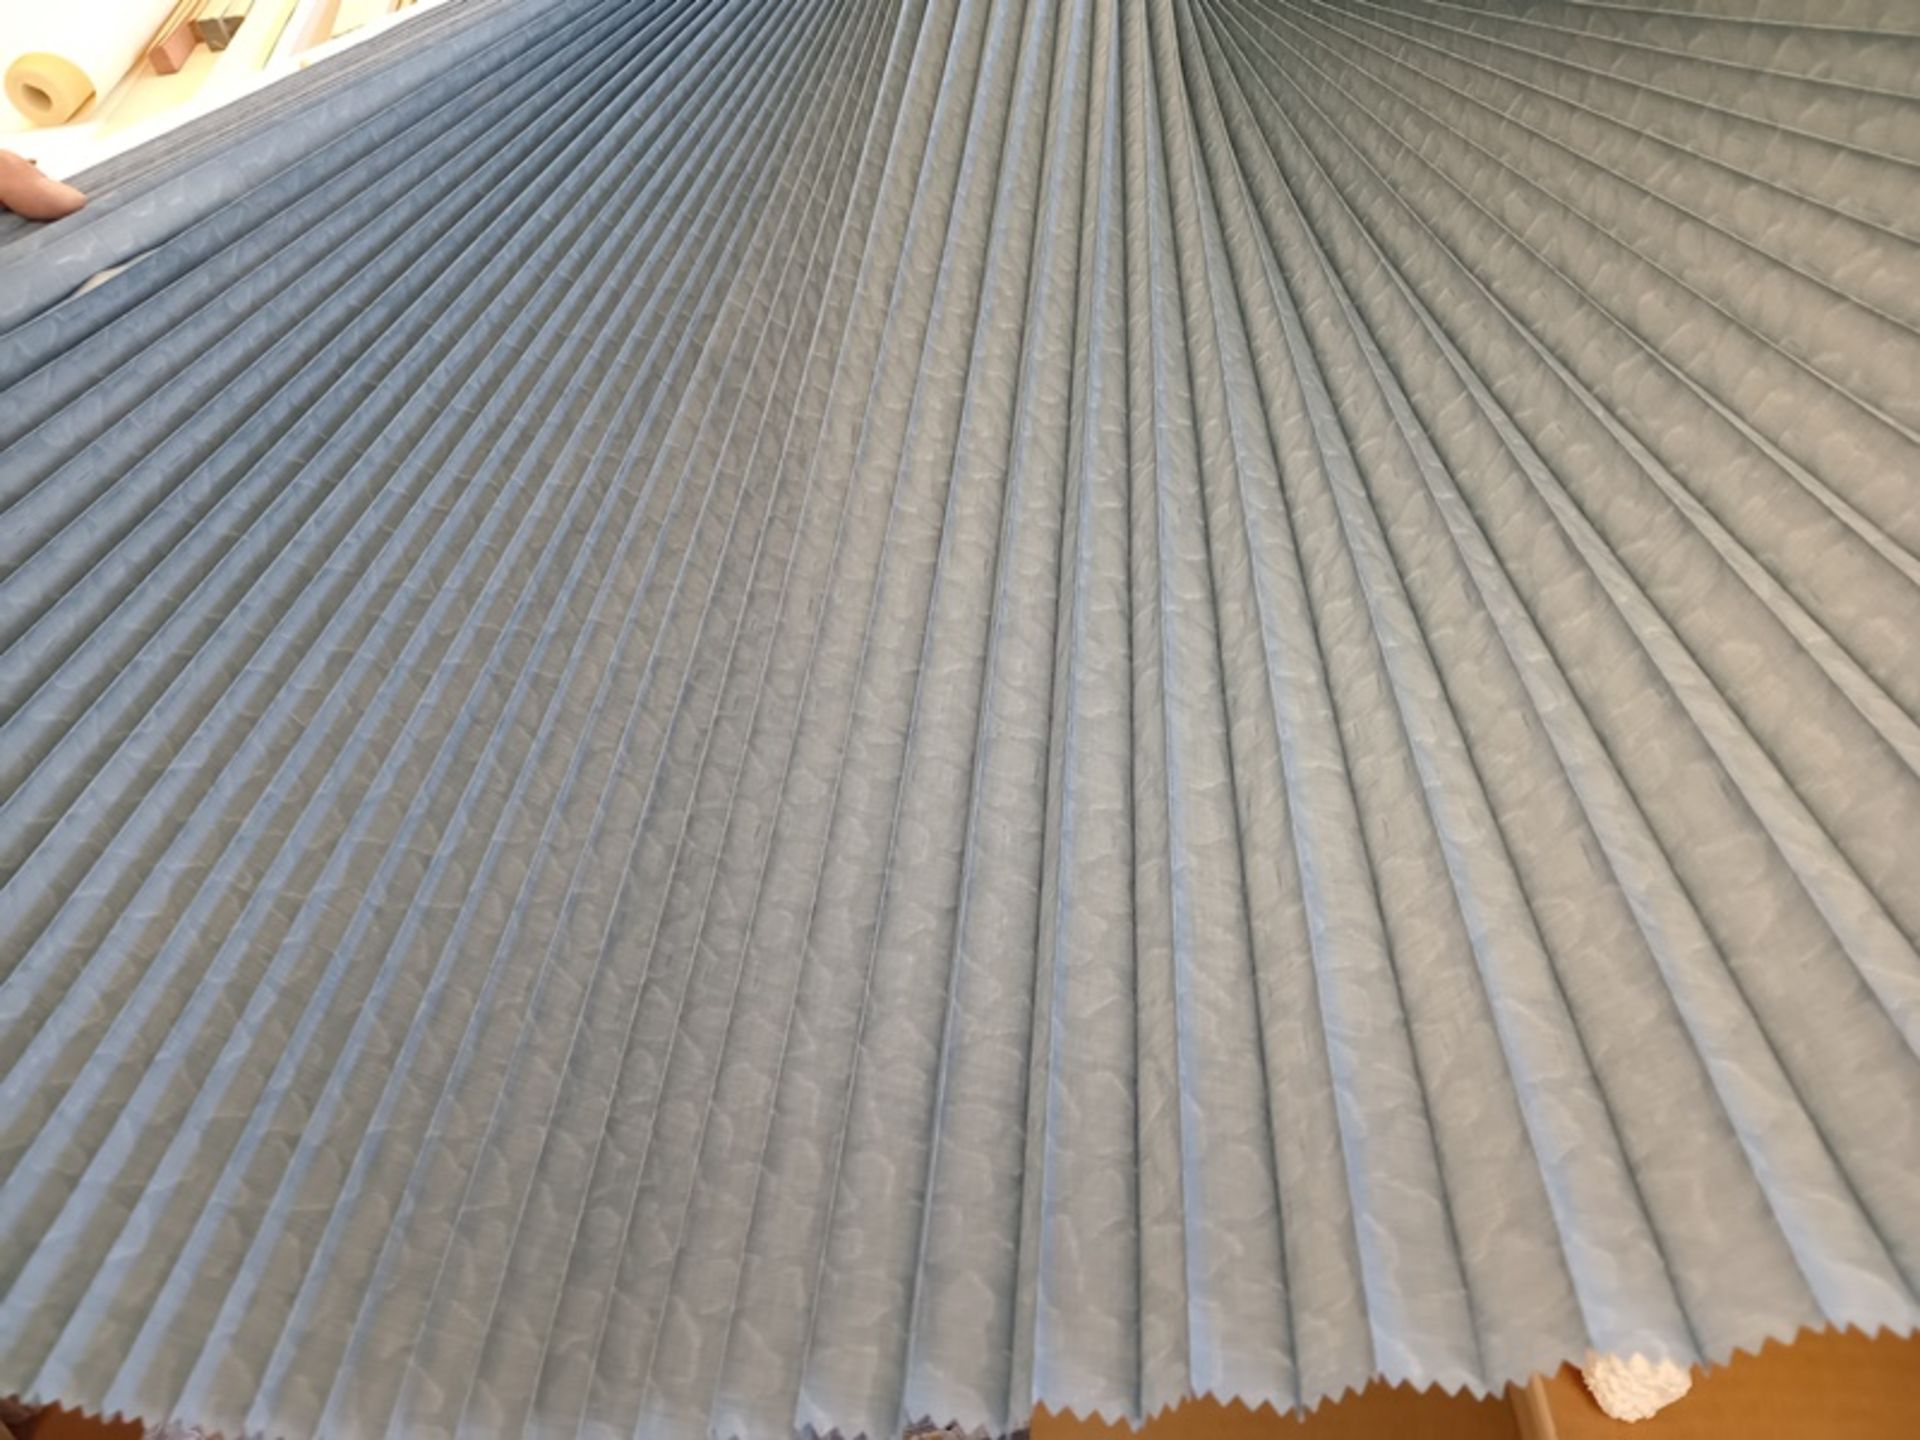 LOT OF APPROXIMATELY (27,400) M2 OF BLINDS PLEATED FABRIC - Image 34 of 35